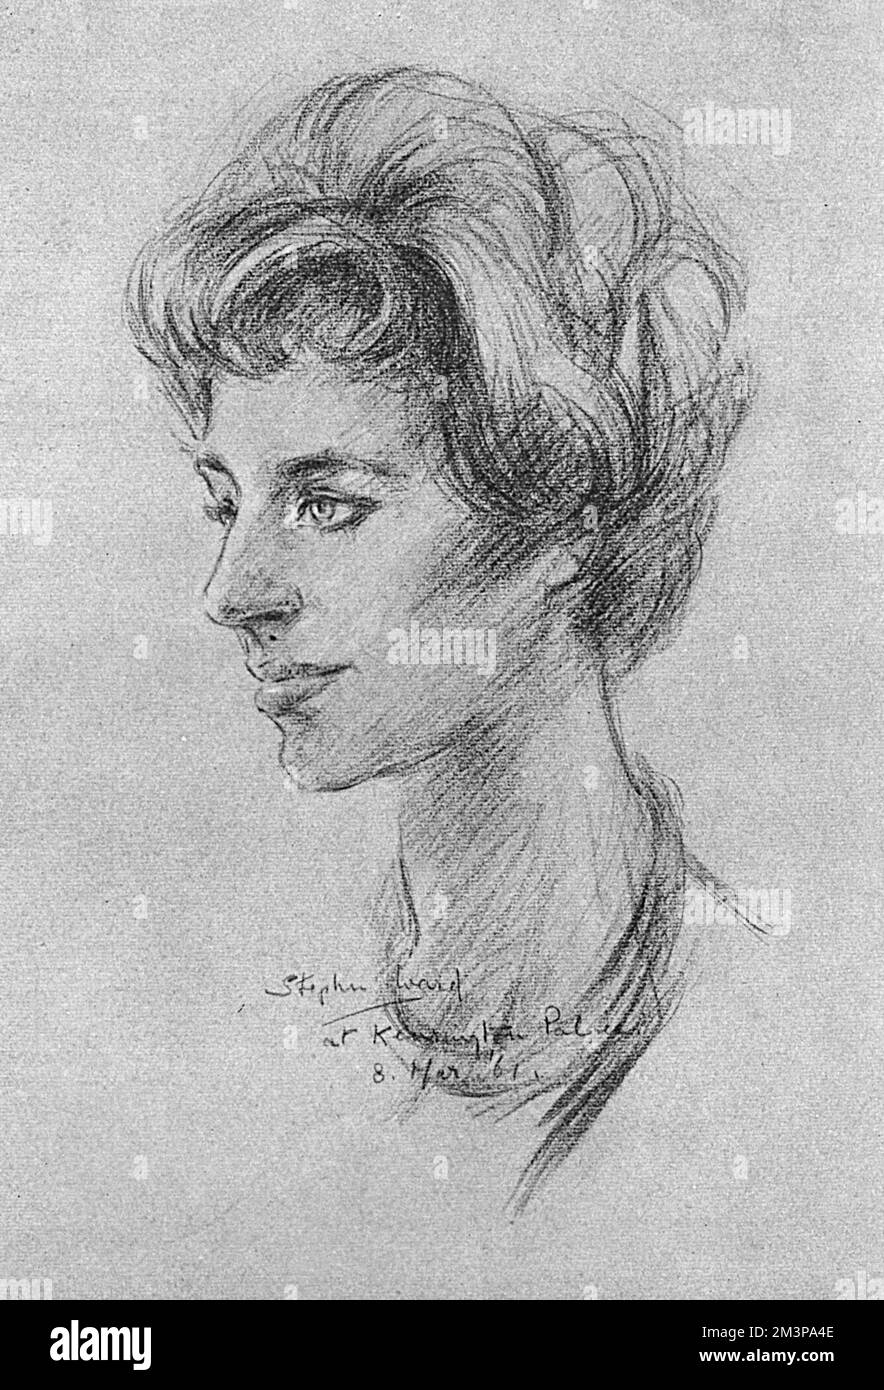 Princess Margaret(1930-2002), as drawn from life by Stephen Ward, at a sitting specially granted to the Illustrated London News in 1961. Ward sketched several high profile figures for the Illustrated London News in 1961, but two years later he would become notorious through his involvement in the Profumo Affair.     Date: 1961 Stock Photo